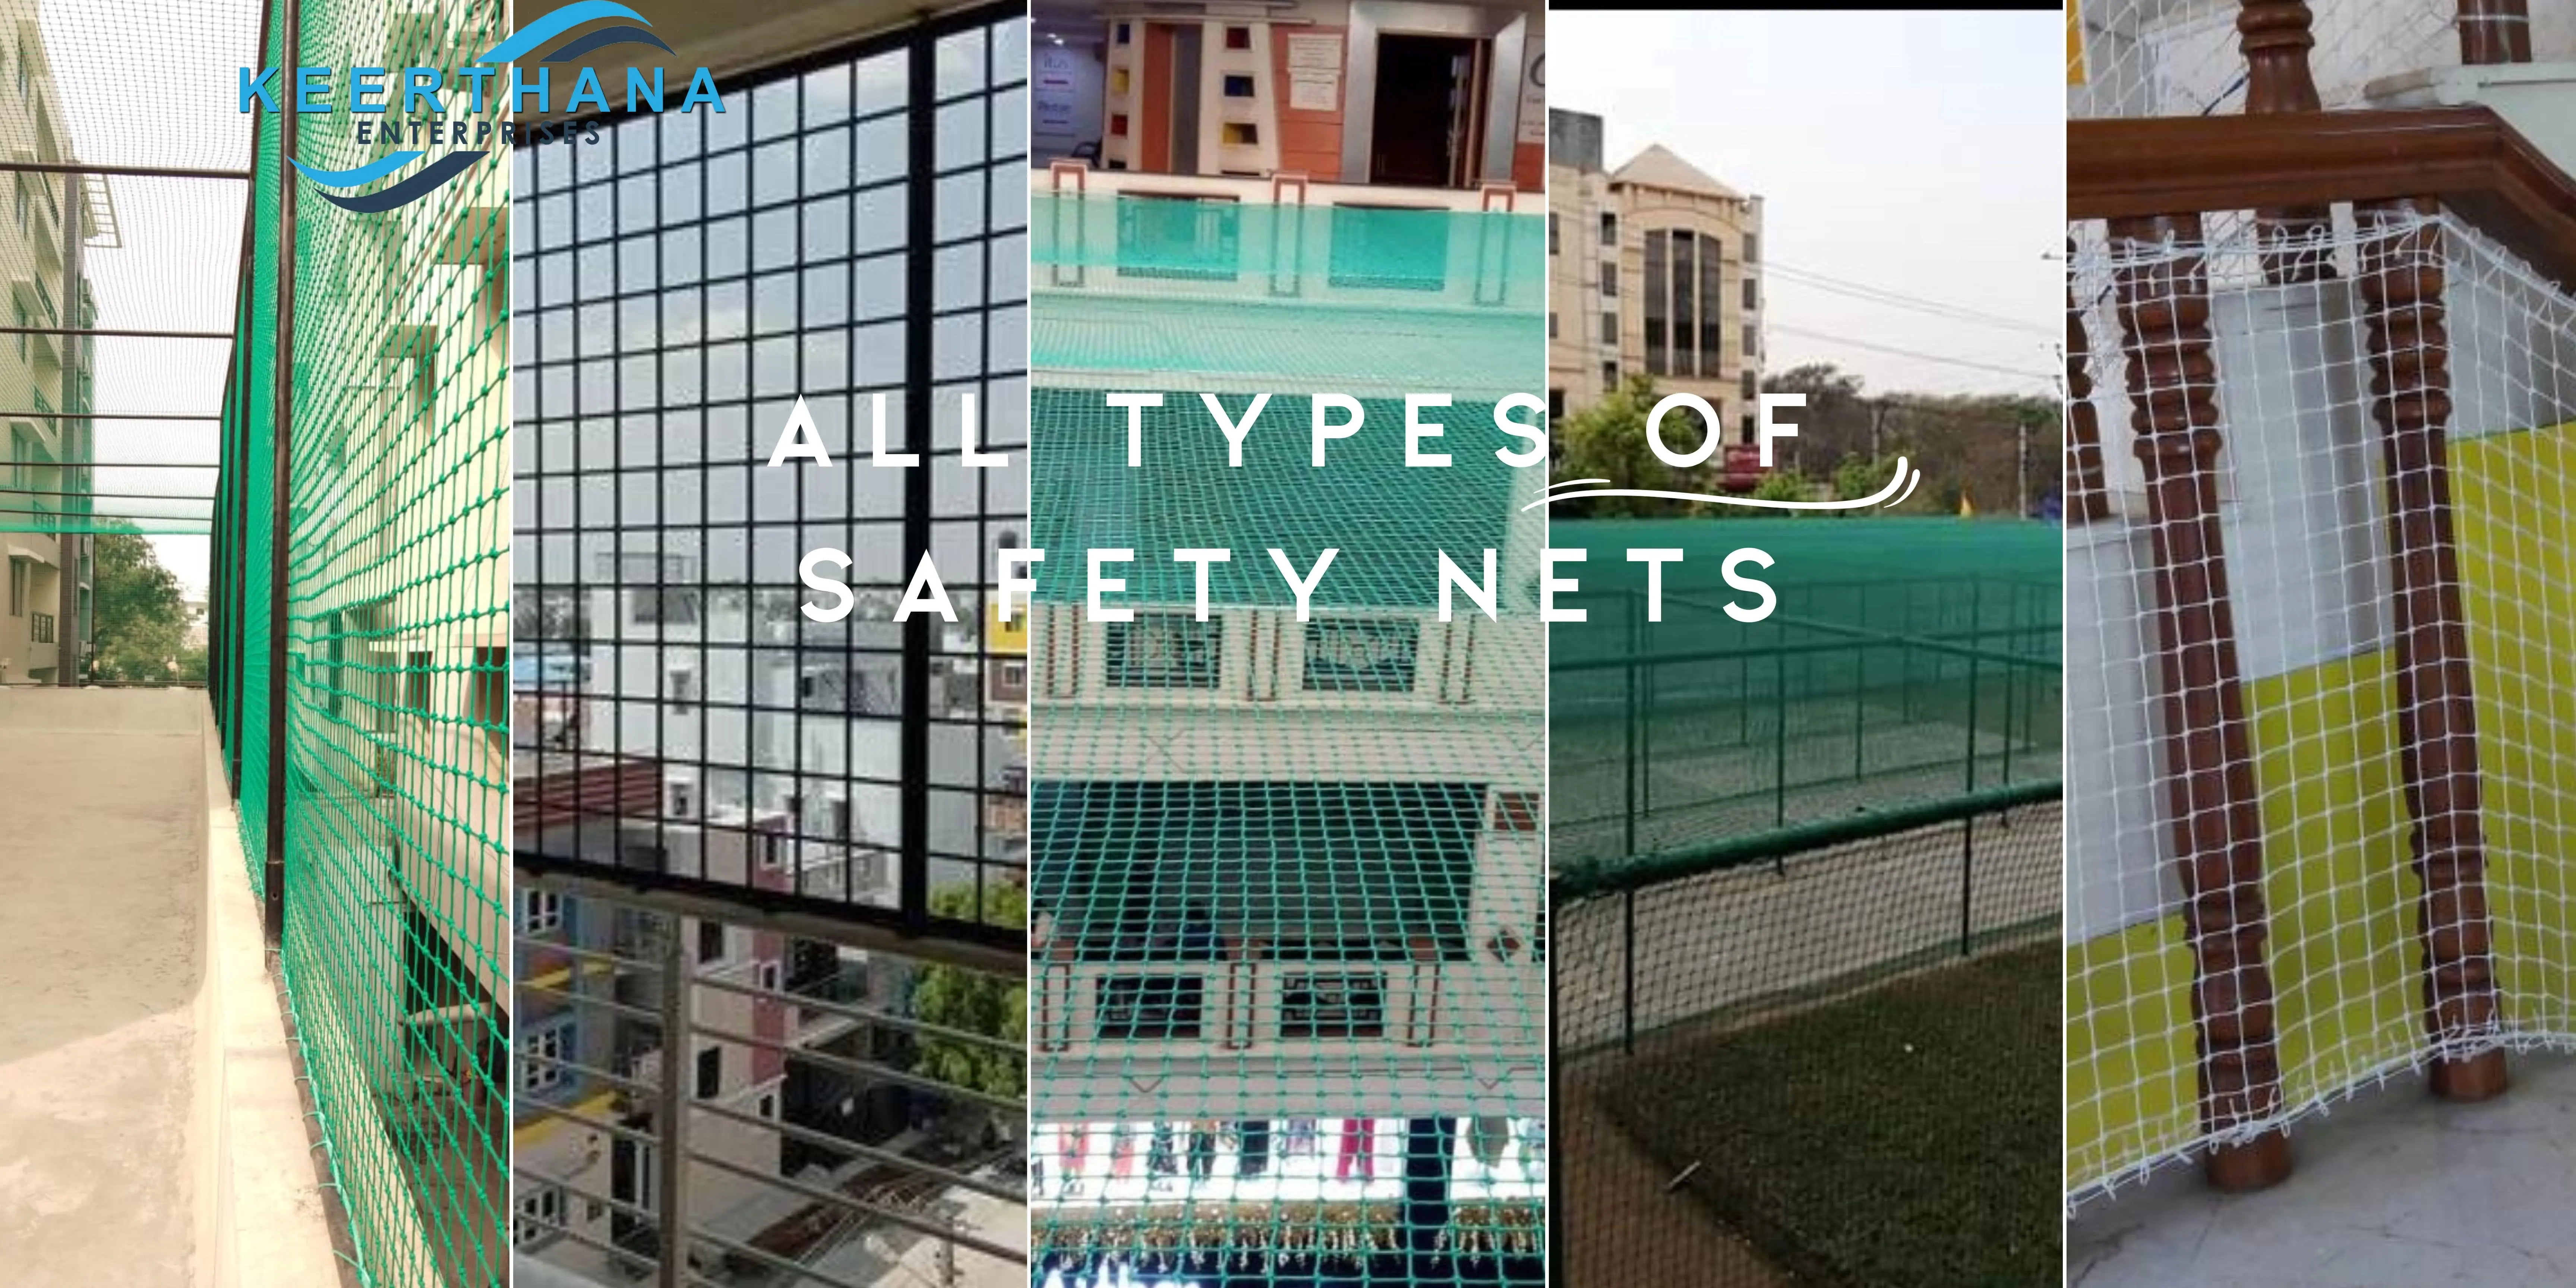 All types of Safety nets